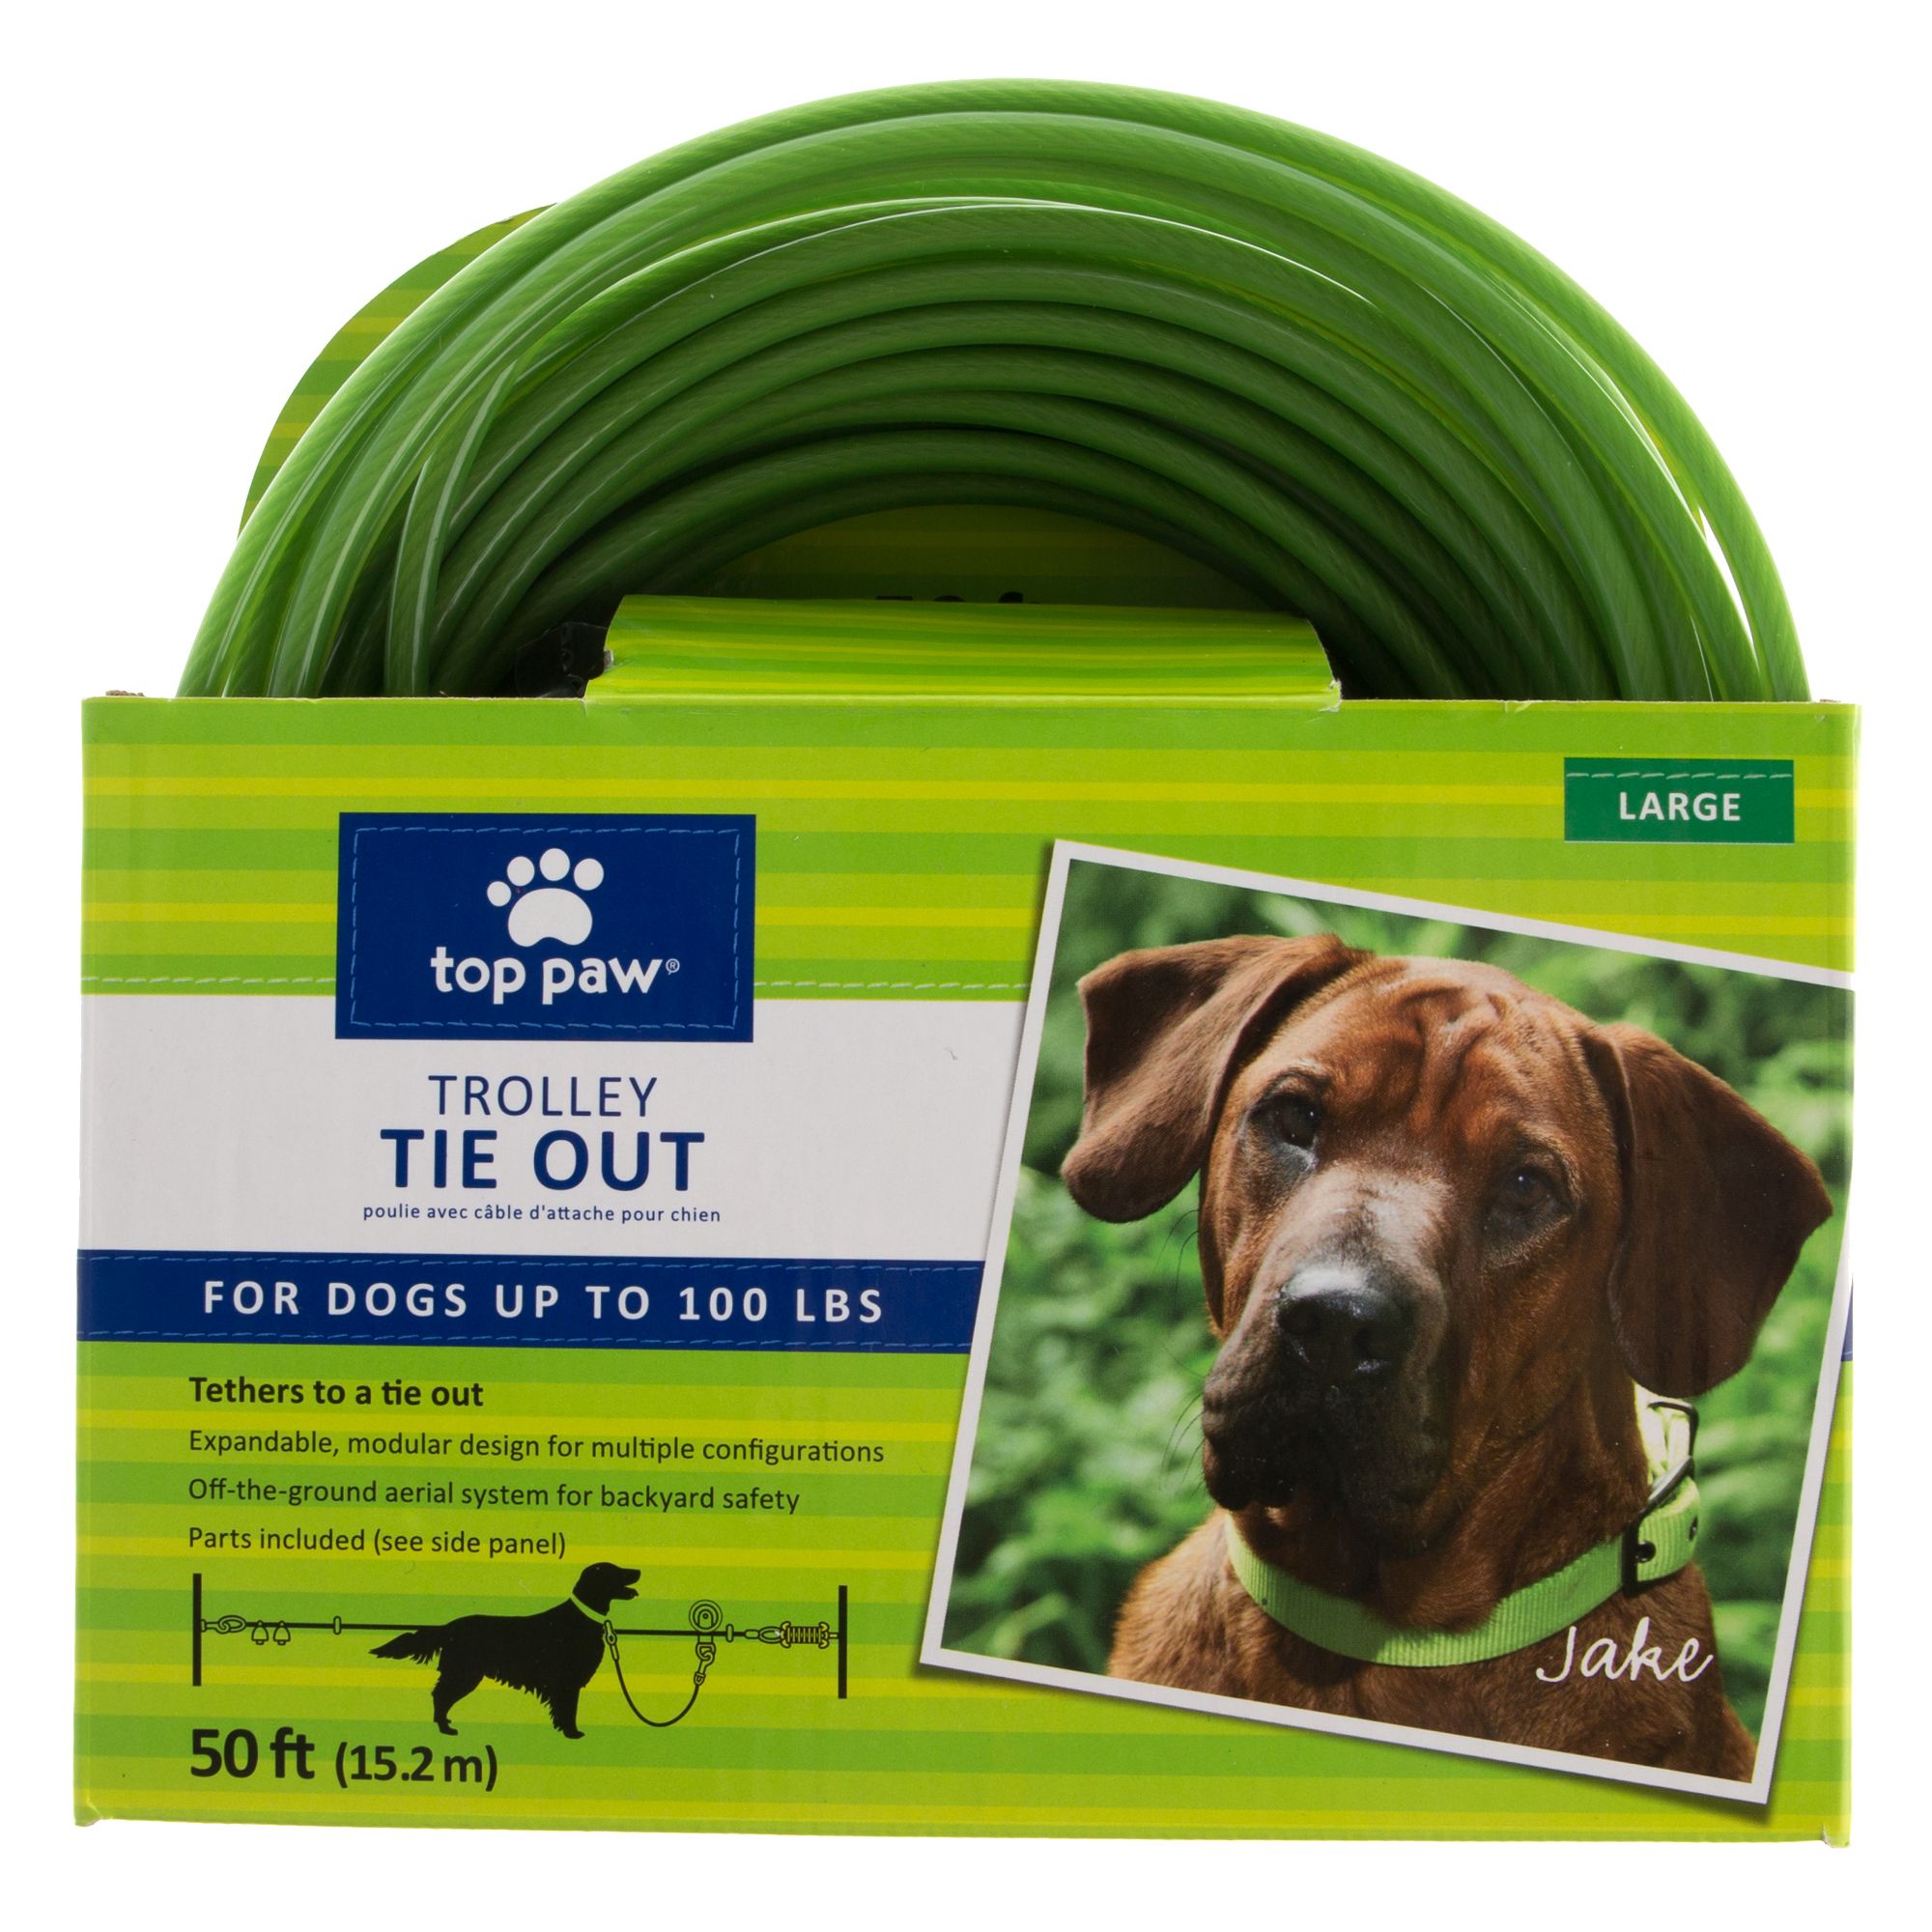 Top Paw® Trolley Dog Tie Out | dog Tie 